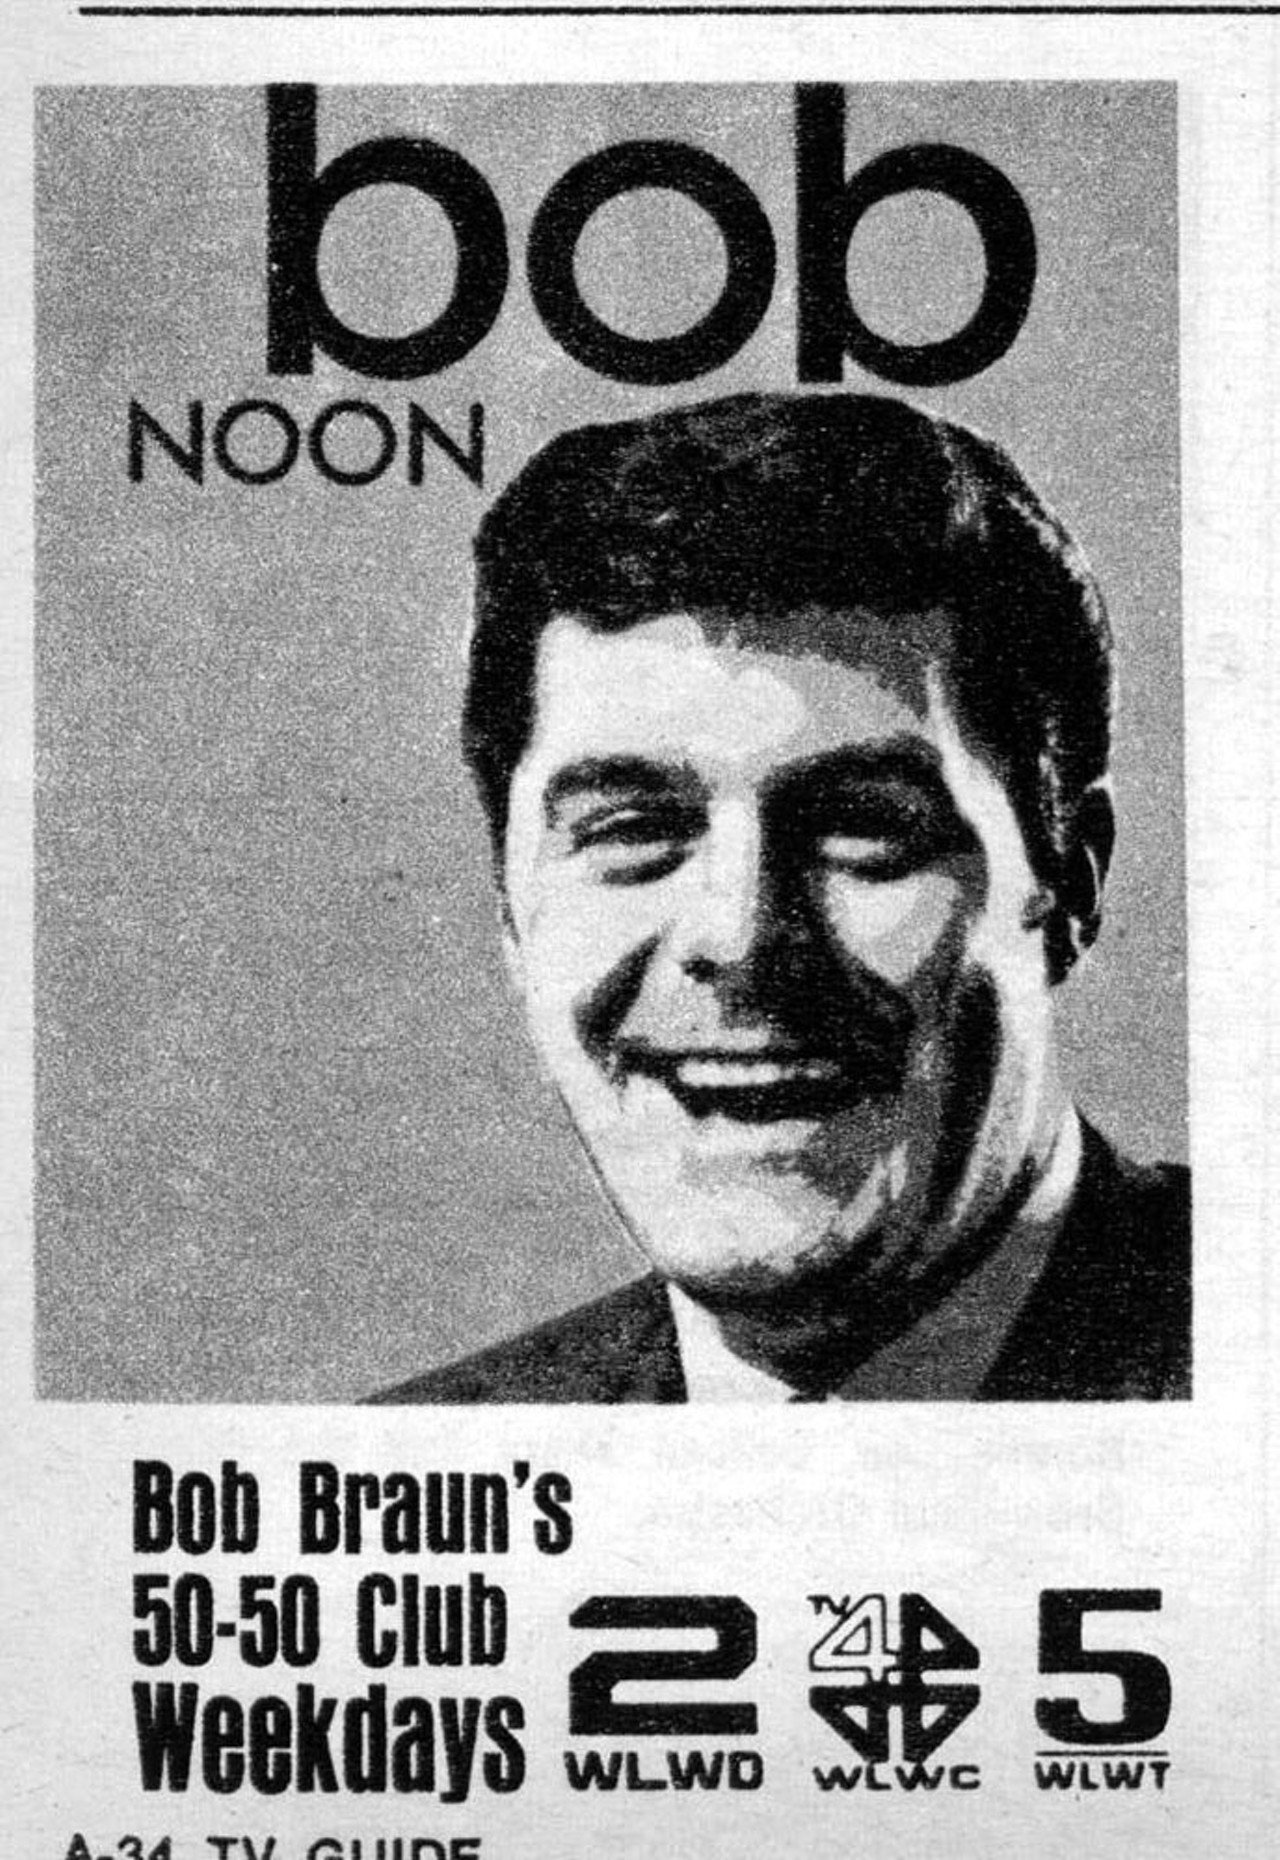 Bob Braun Sr. 
Spring Grove Cemetery, 4521 Spring Grove Ave., Spring Grove Village
Between 1967 and 1984, many Midwesterners loved tuning in to the The Bob Braun Show. The 90-minute live telecasts received high ratings, and hosted special guests, live bands and singers. Guests included Bob Hope, Lucille Ball, Johnny Carson, Dick Clark, Ronald Reagan and a young George Clooney who gave viewers the low-down on his recent tonsillectomy. The charming host, television and radio personality, Robert E. Braun, is interred at Spring Grove, Garden LN, section 141F, lot 283, space 1.